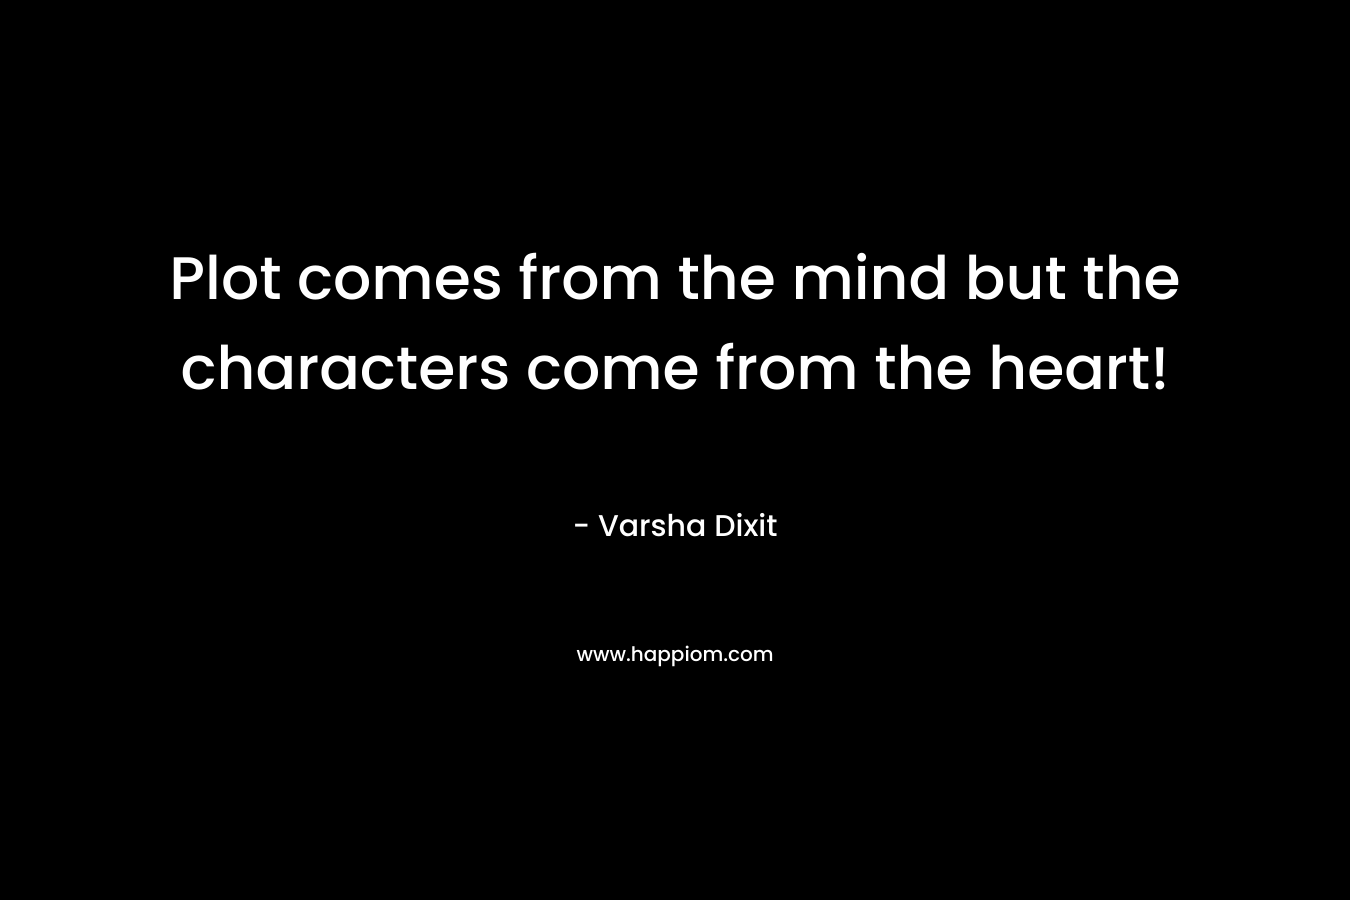 Plot comes from the mind but the characters come from the heart! – Varsha Dixit